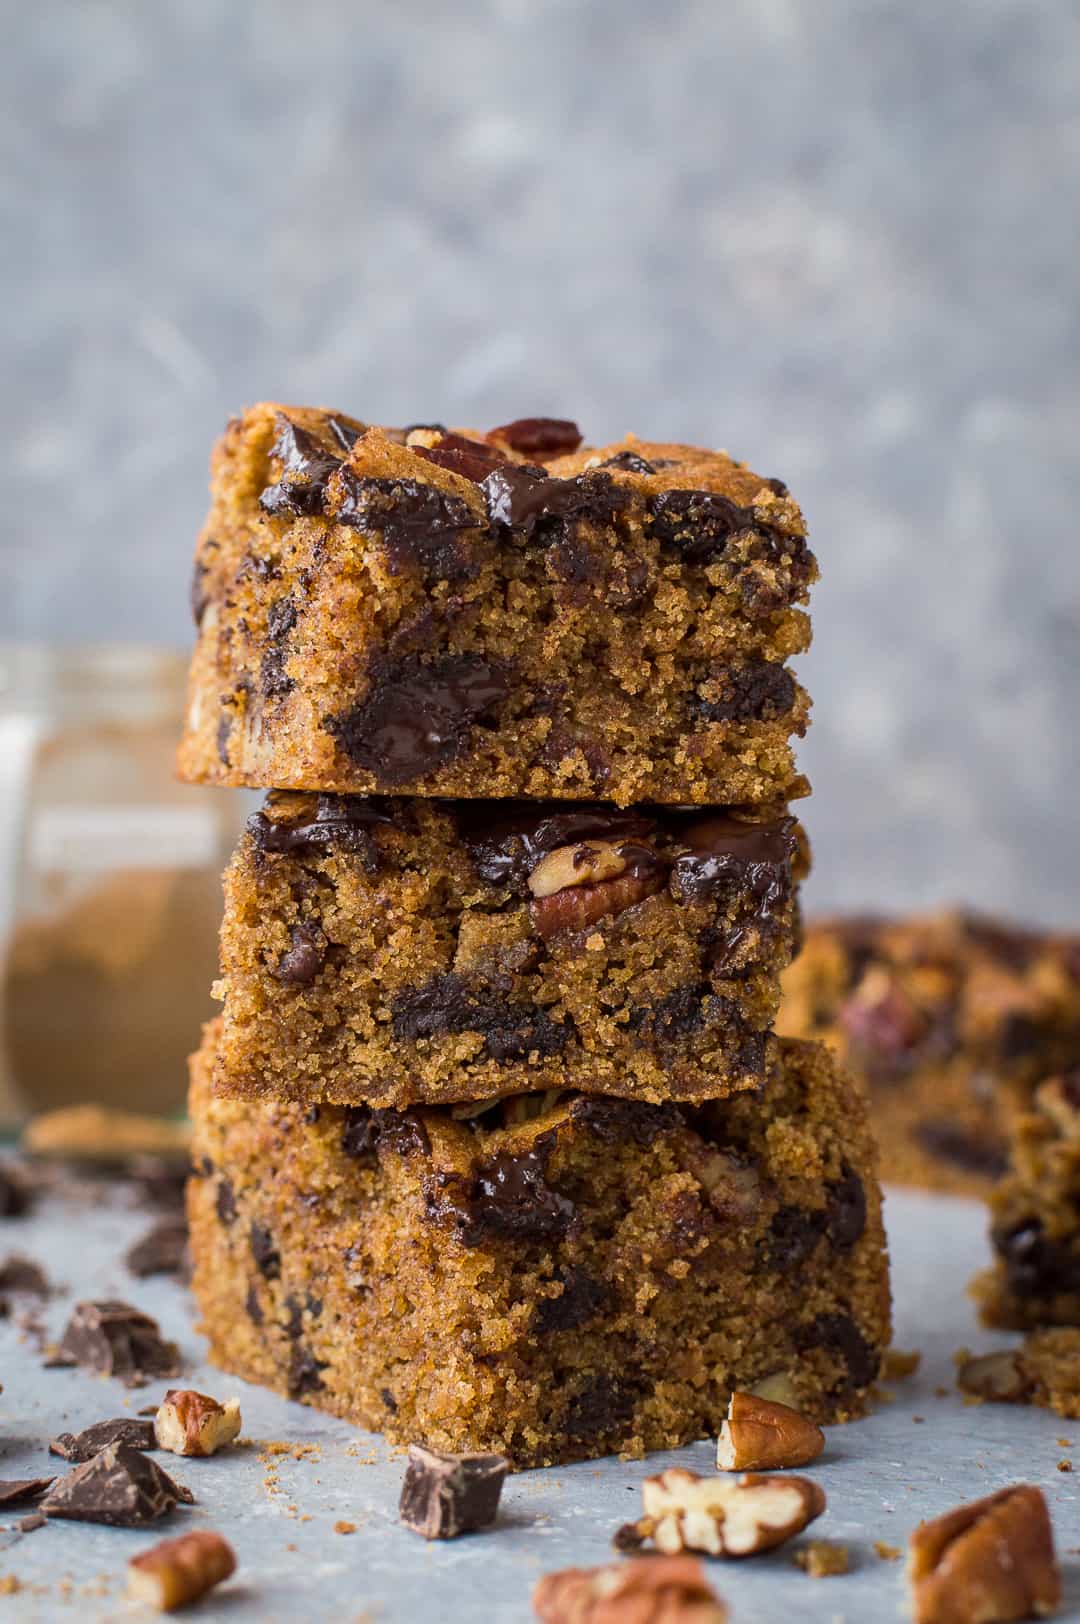 A stack of egg and dairy free vegan peanut butter chocolate chip pecan bars on a grey background